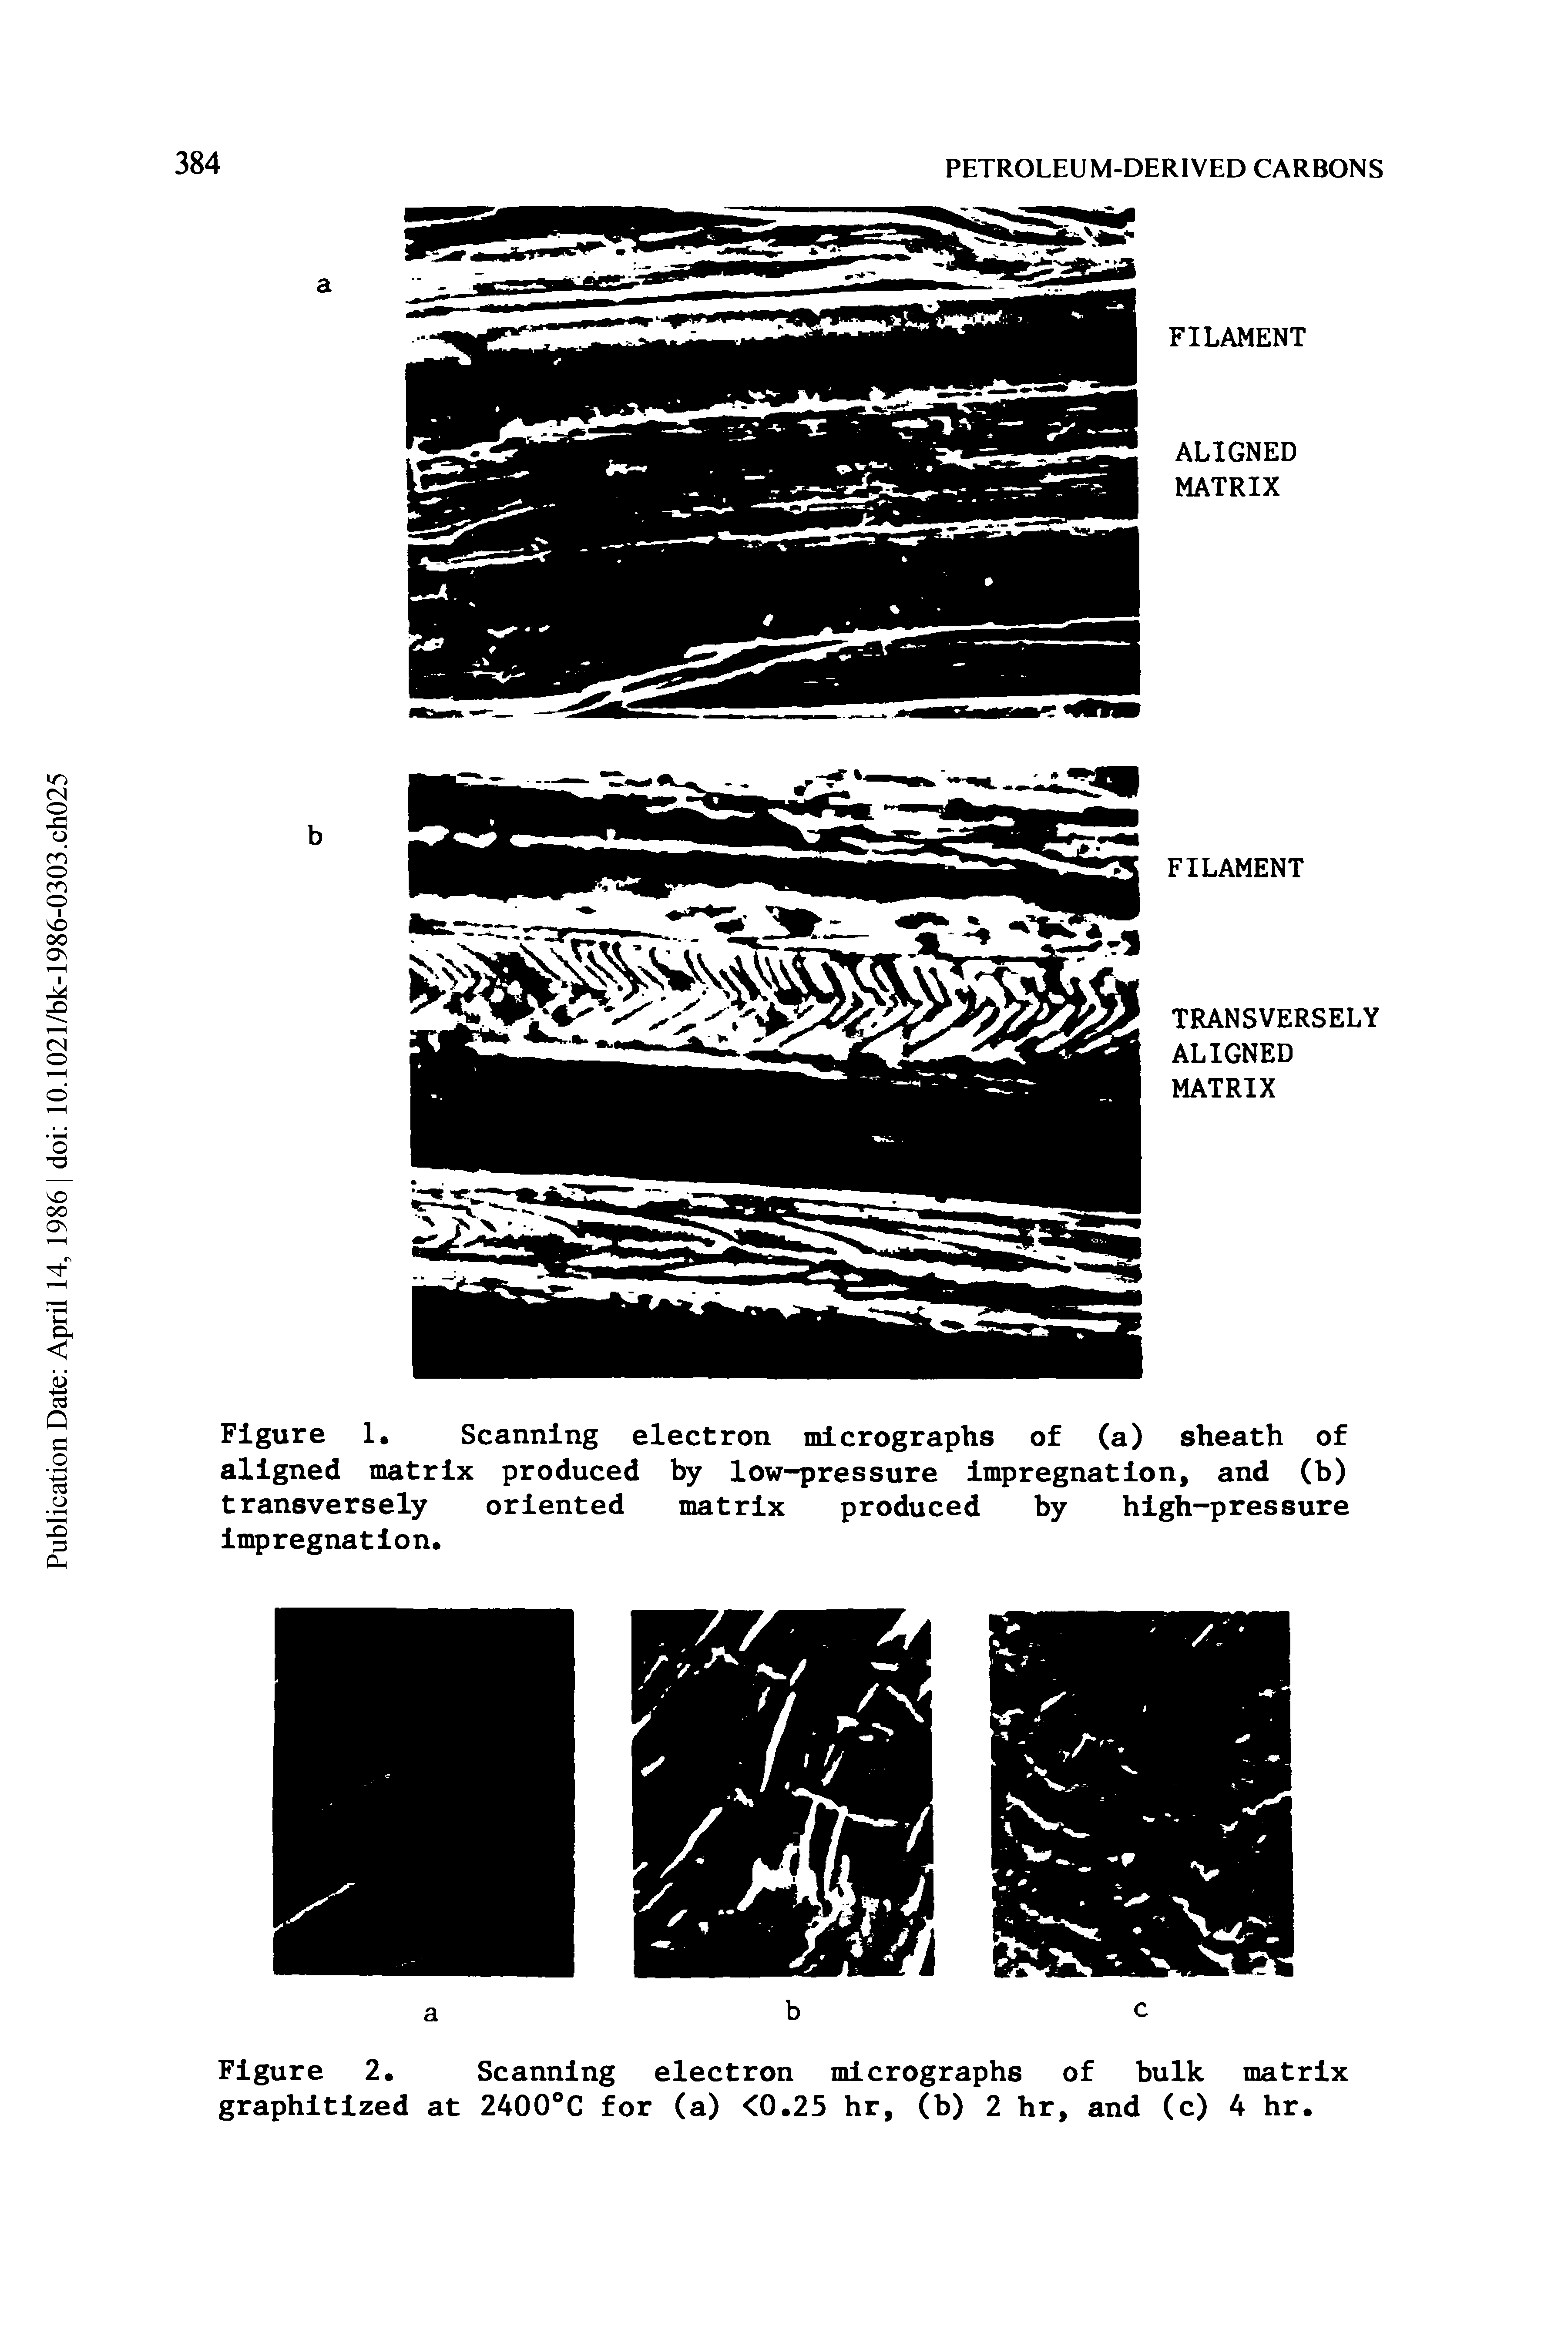 Figure 1. Scanning electron micrographs of (a) sheath of aligned matrix produced by low-pressure impregnation, and (b) transversely oriented matrix produced by high-pressure impregnation.